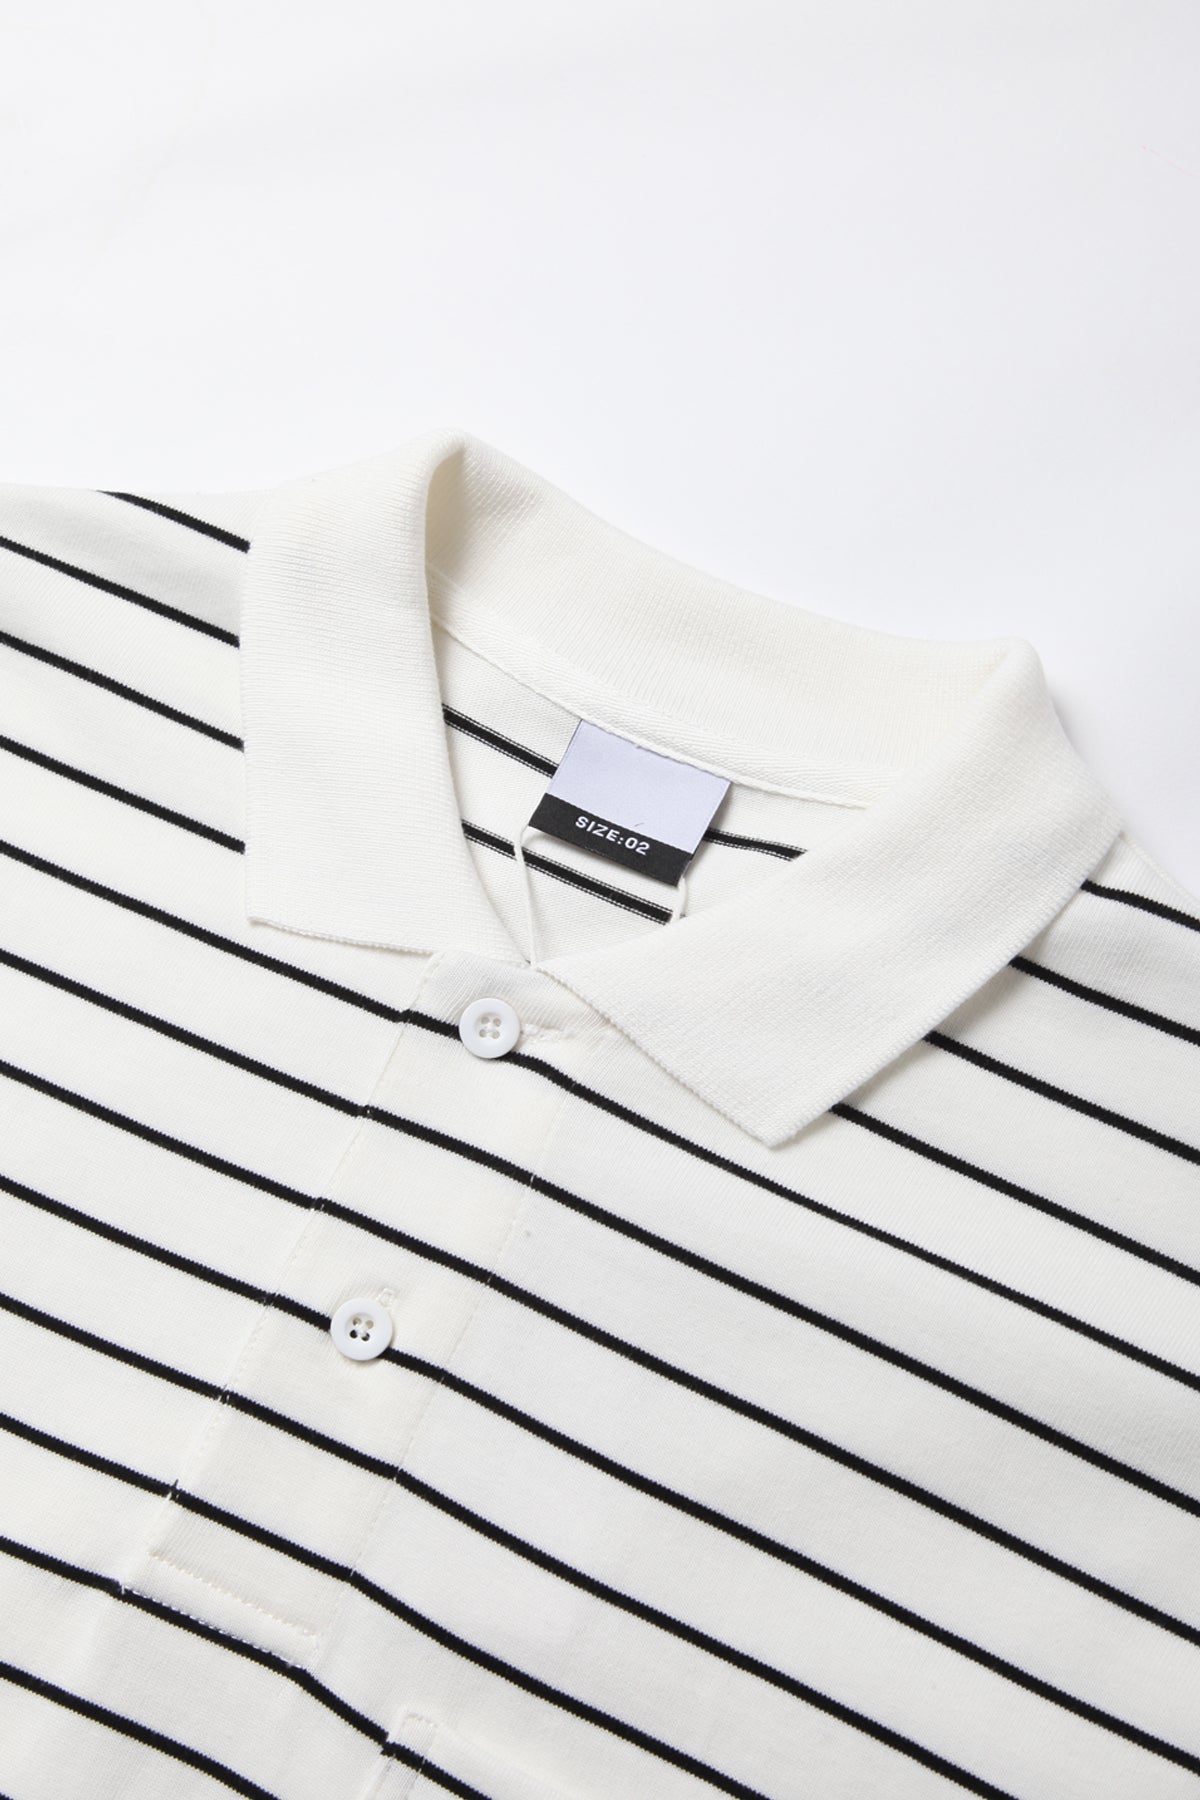 TRS - Oversized Striped Polo - White